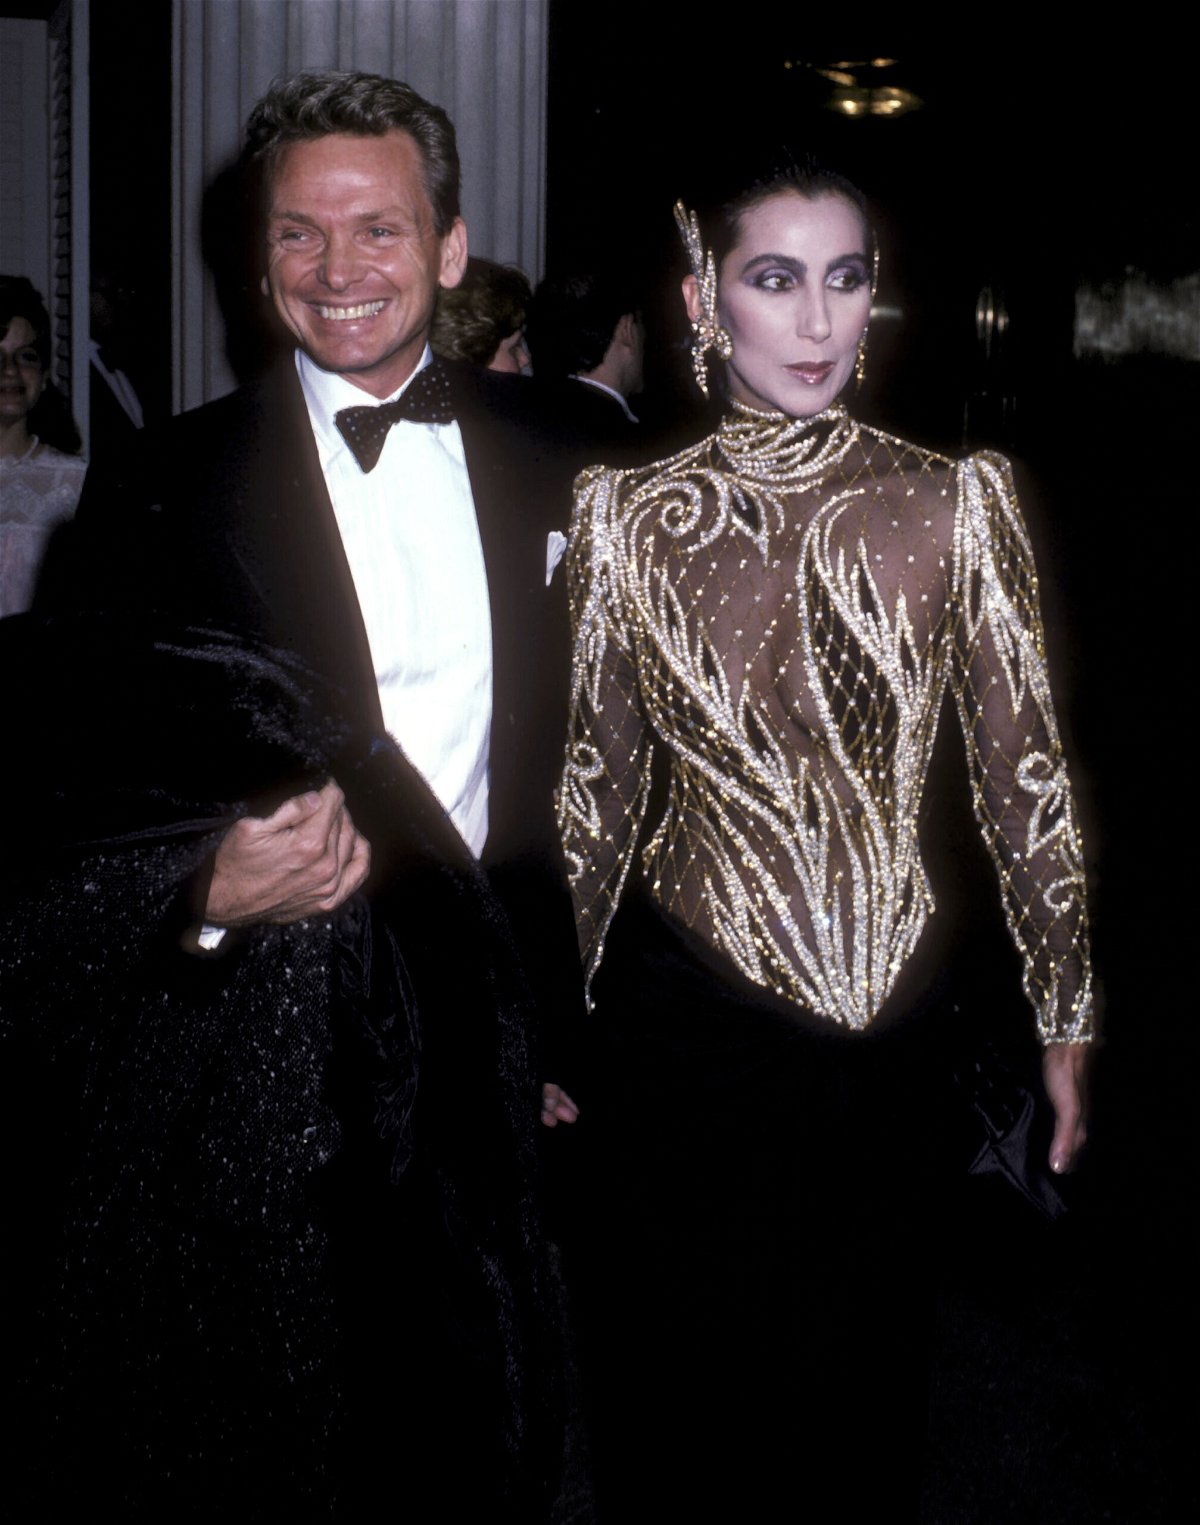 <i>Ron Galella/Ron Galella Collection/Getty Images</i><br/>Bob Mackie and Cher attend the Metropolitan Museum's Costume Institute Gala Exhibition of 